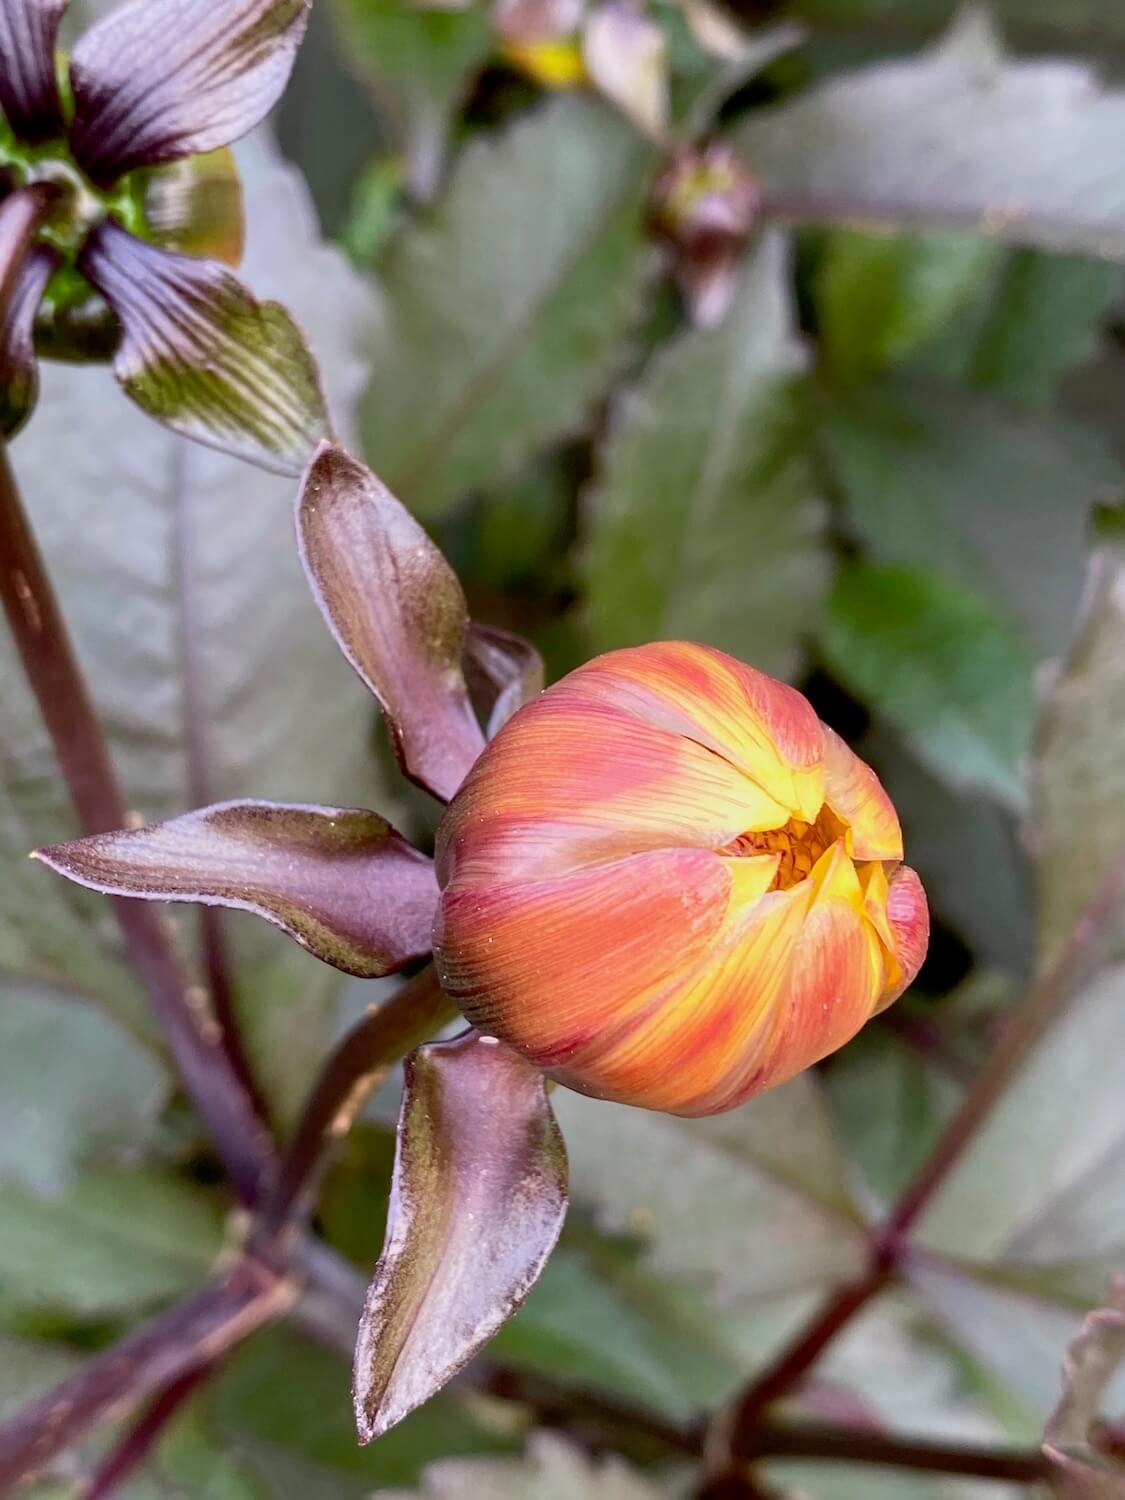 A tight bud of a dahlia, ready to burst out with color in the community garden. The stem and leaves are a purple color while the bud is orange with yellow tips toward the opening of the flower.  These photos of a Seattle garden bring to life the feeling of the patch of green. 